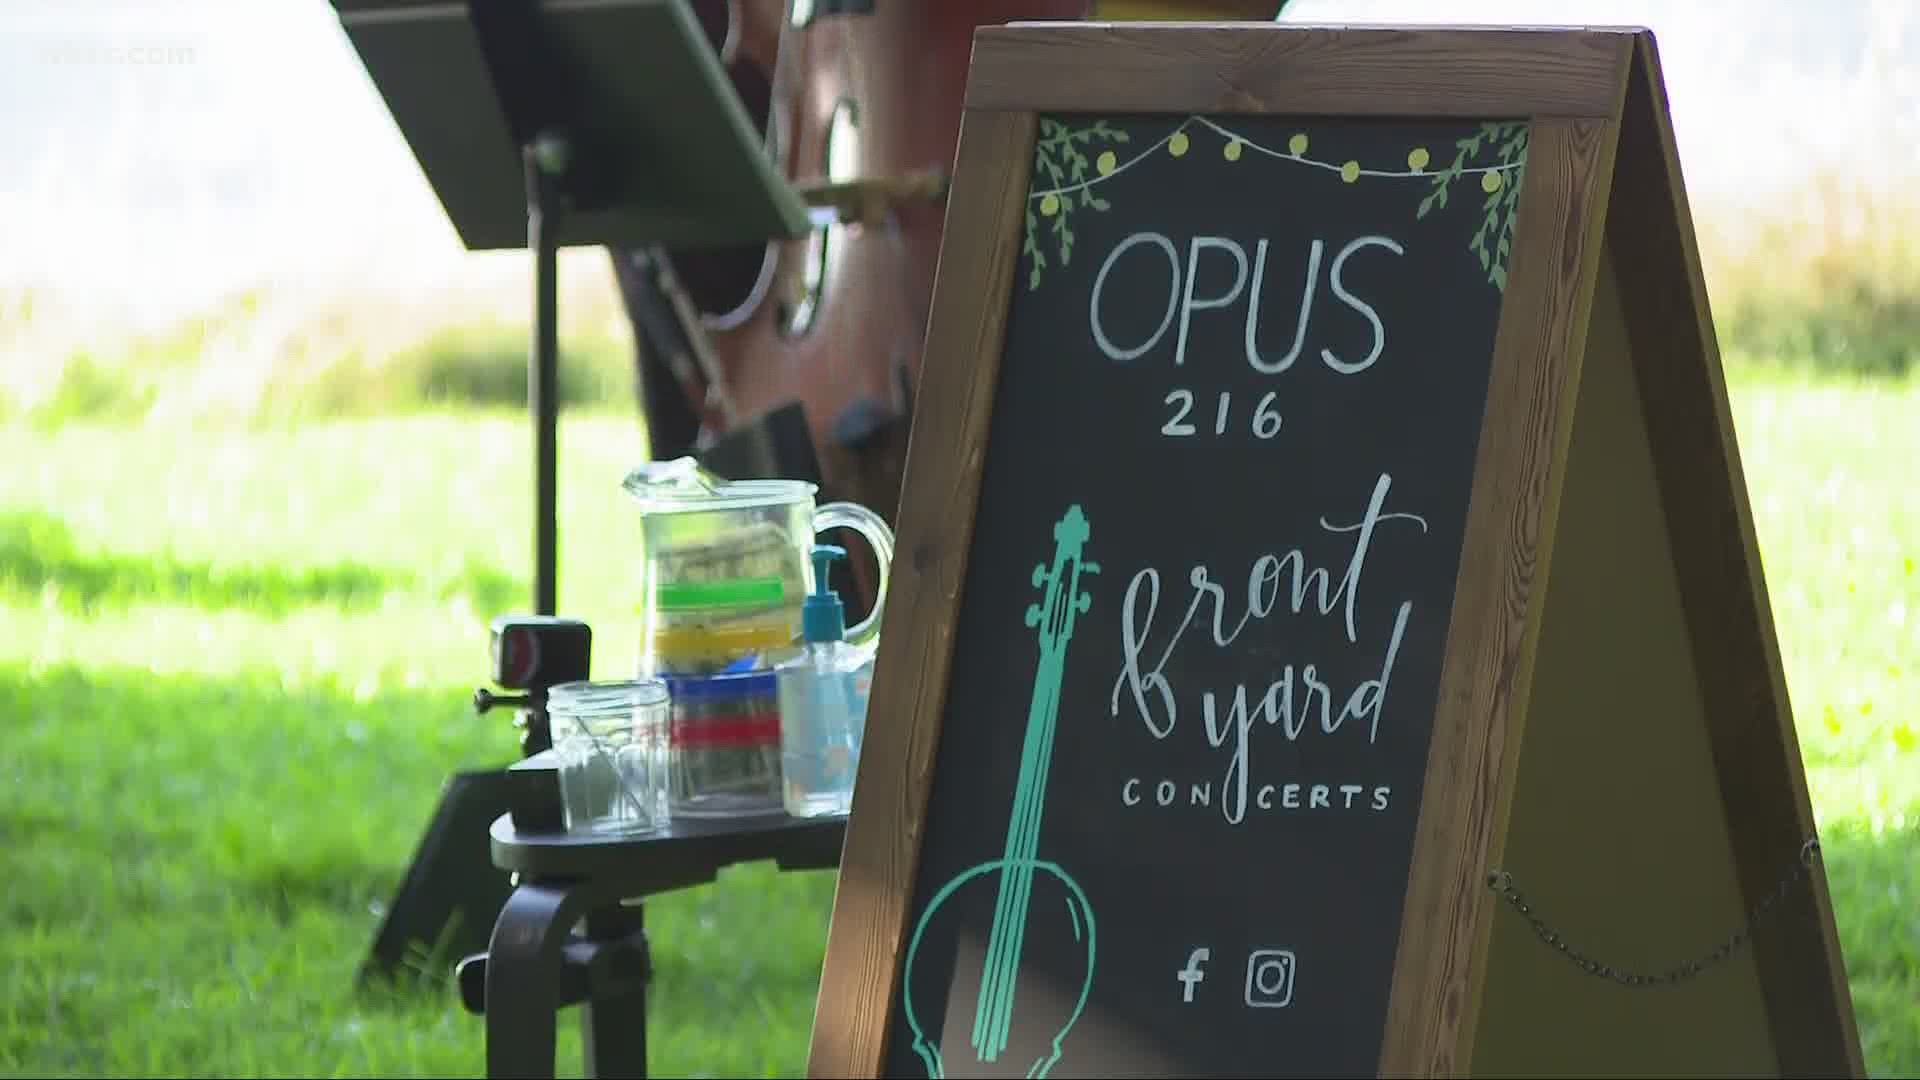 Local musicians are bringing the community together - turning porches and parks into concert stages. Laura Caso reports.